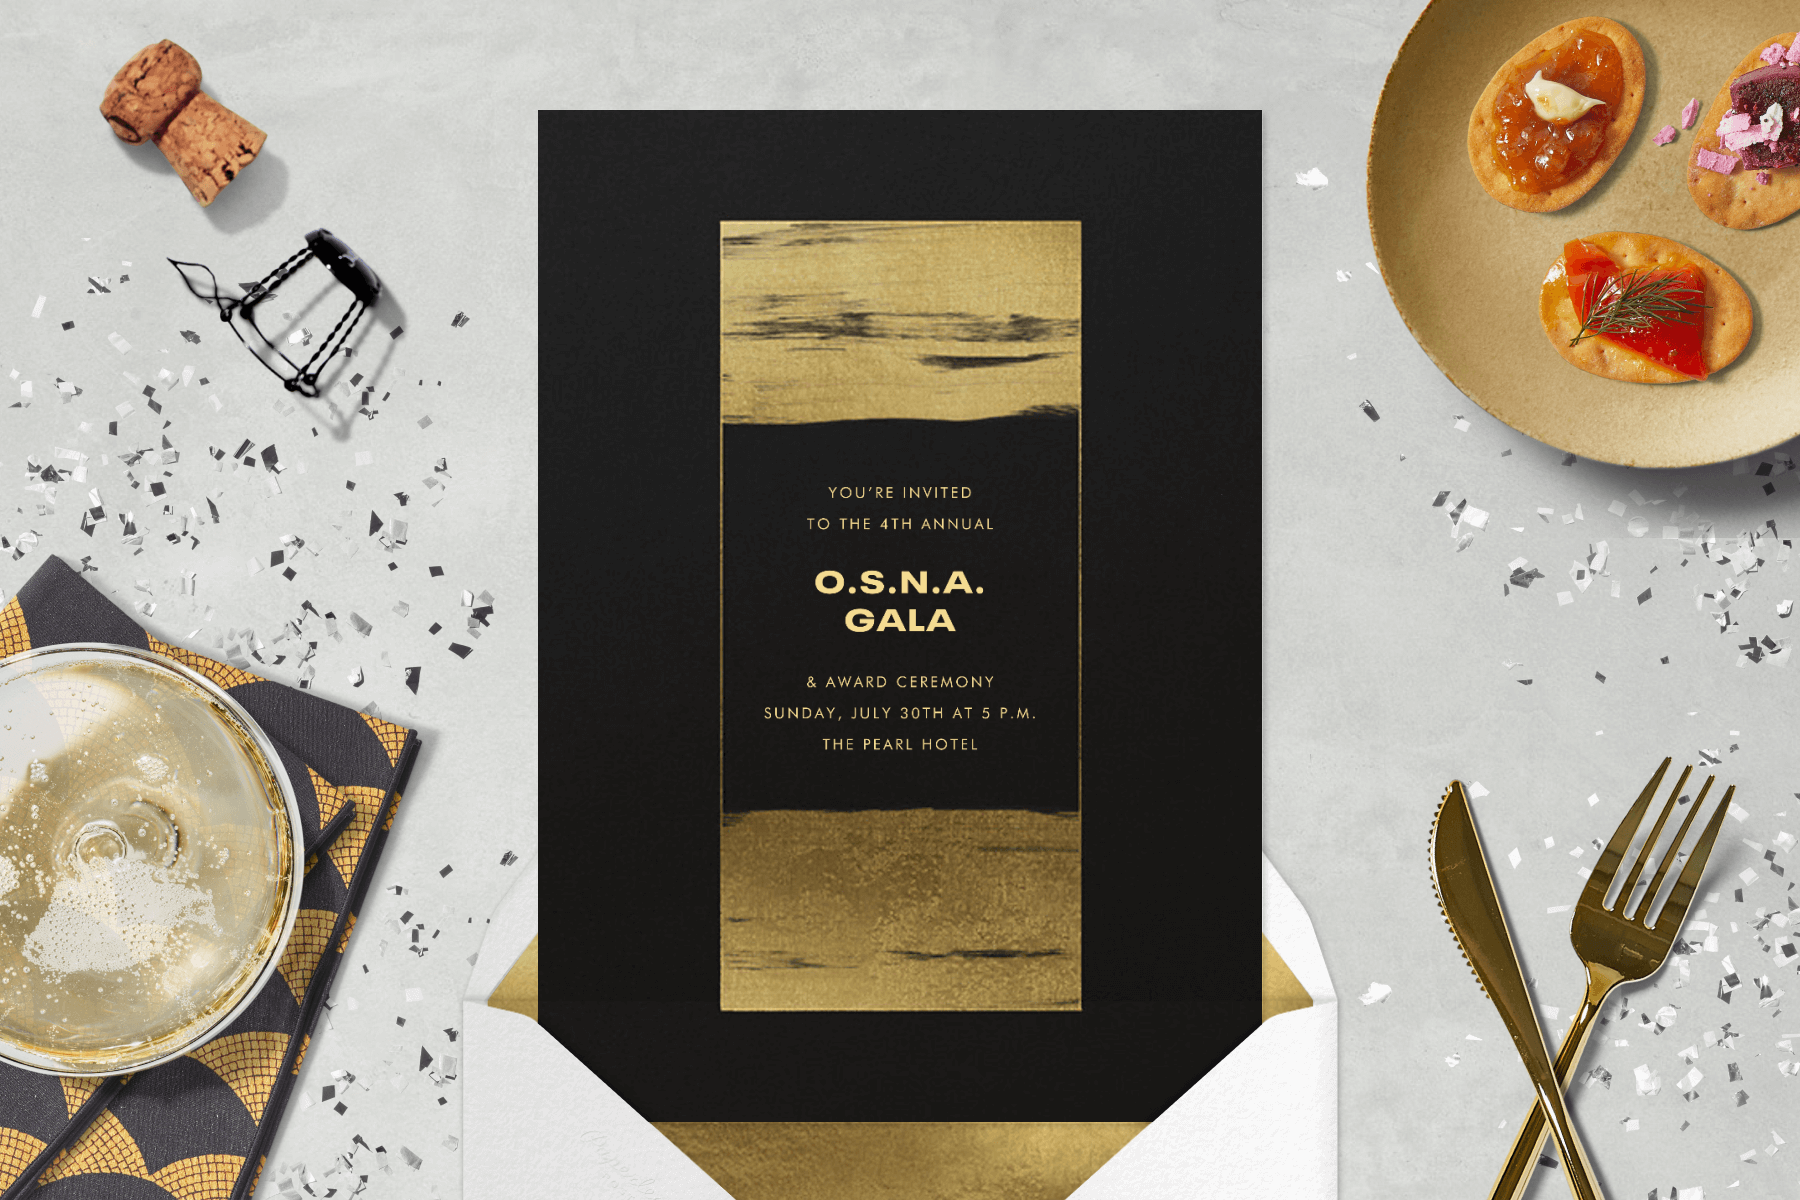 A black and gold “O.S.N.A” gala invitation with painterly gold brush strokes in the center rectangle paired with a golden envelope liner sits amongst a glass of champagne, a small plate of appetizers, a champagne cork, silver confetti, and a gold fork and knife.